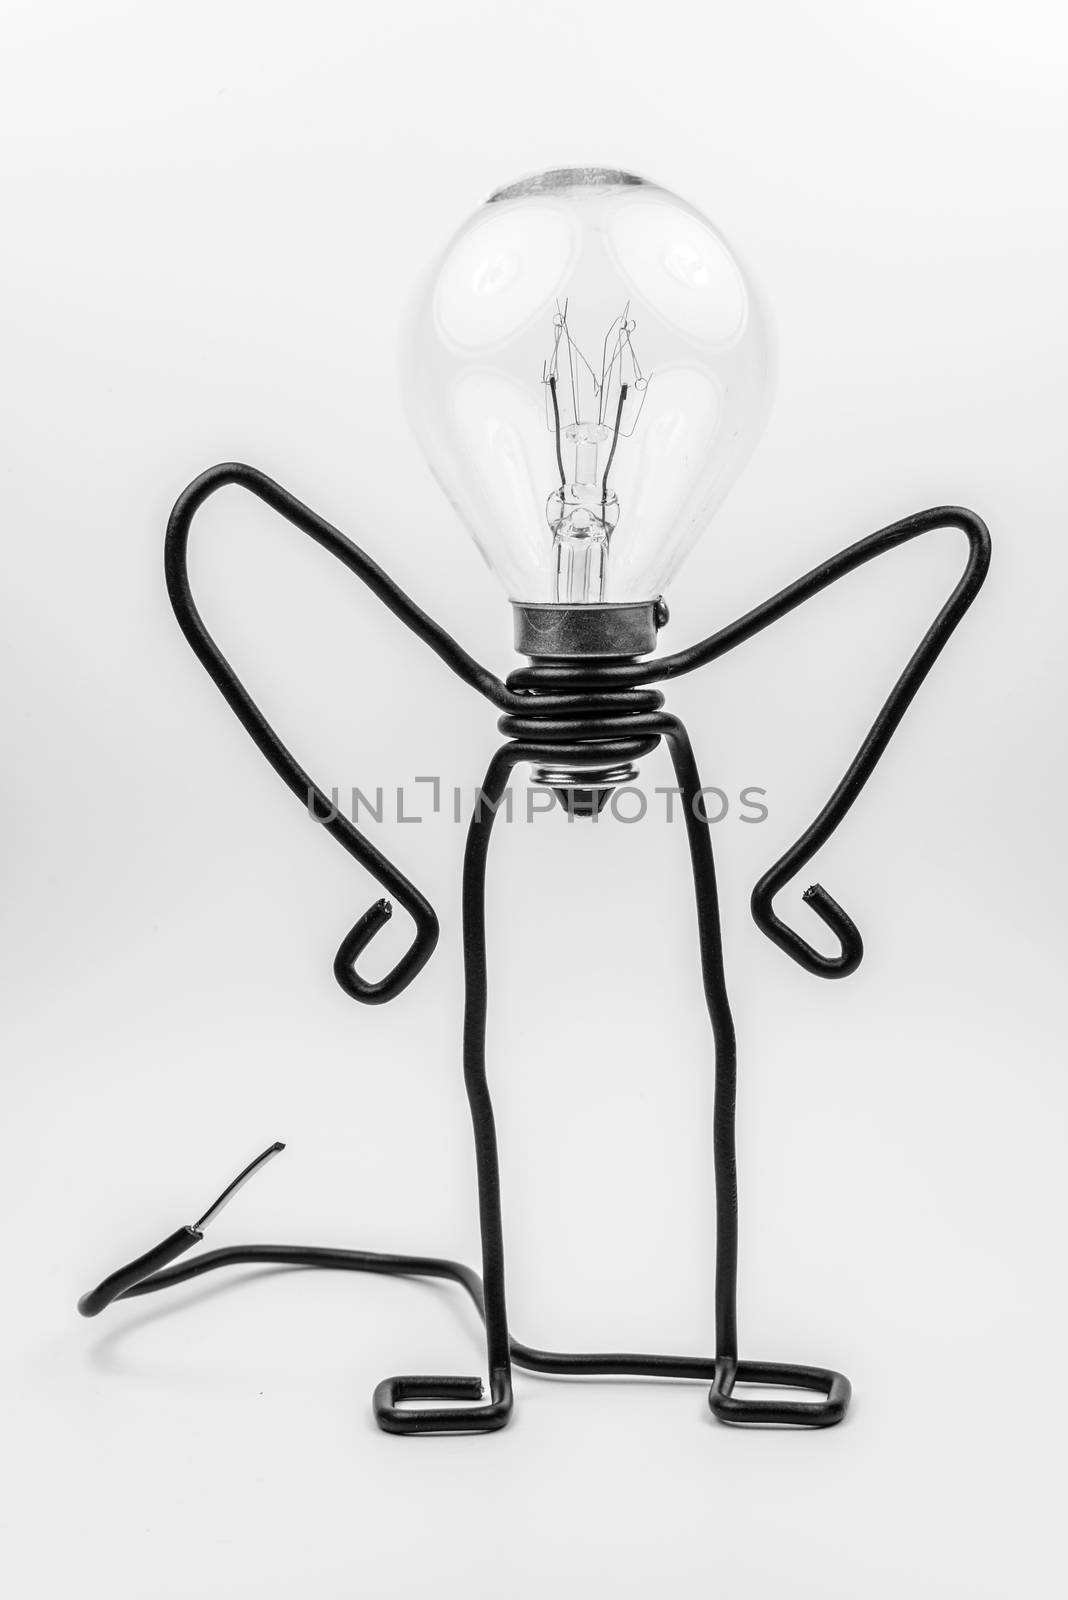 Fantasy figure of a light bulb and wire
 by Tofotografie